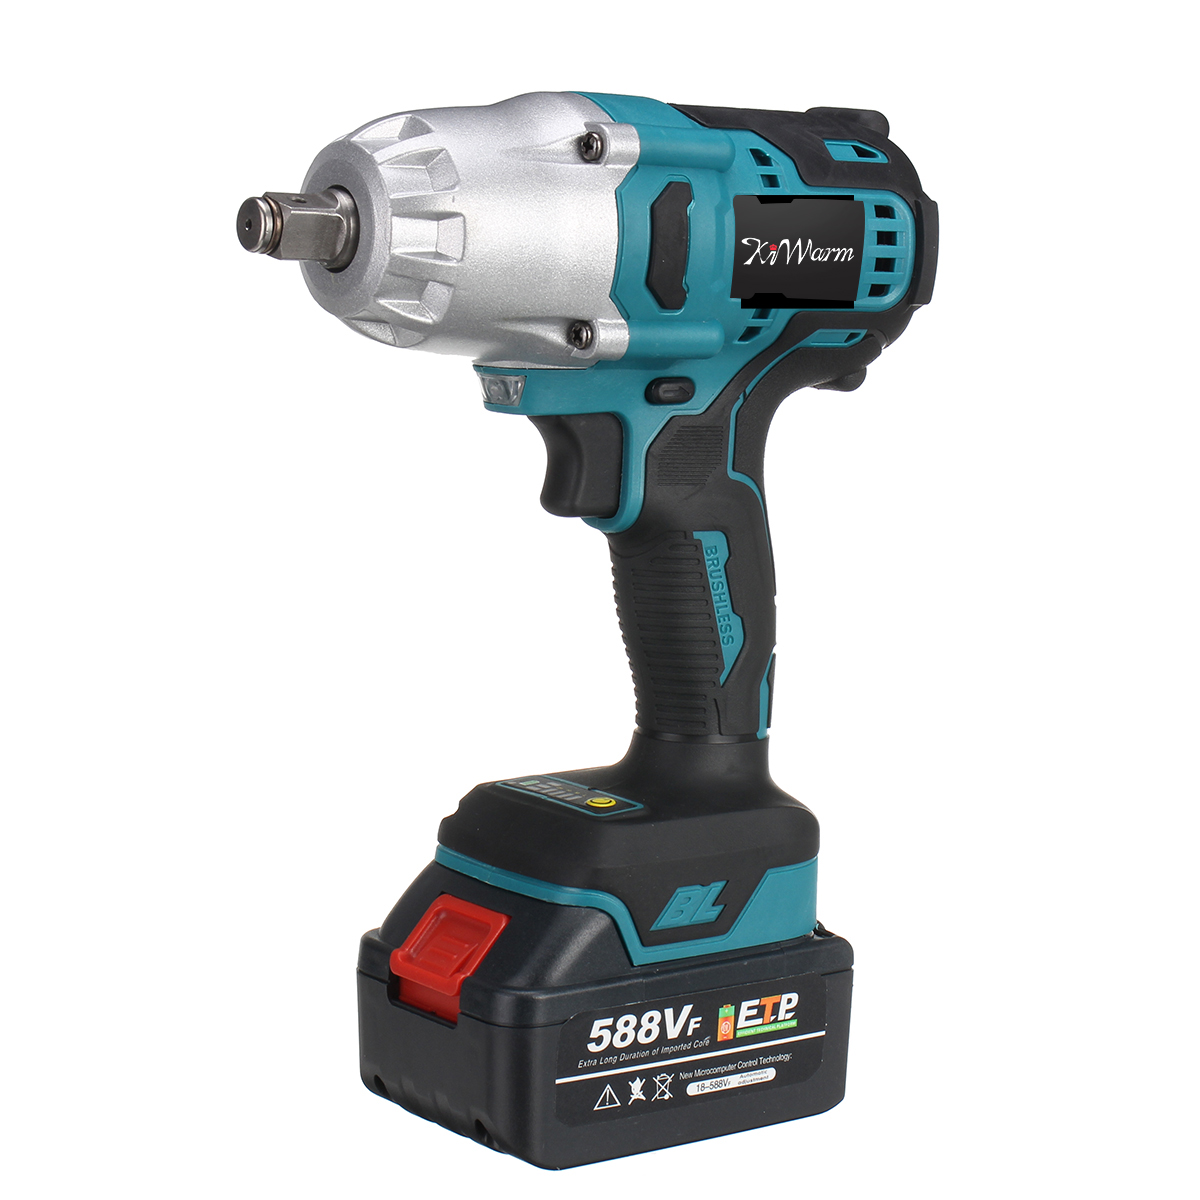 Find KIWAN 588VF Electric Brushless Impact Wrench LED Working Light Rechargeable Woodworking Maintenance Tool W/ Battery EU Plug Fit Makita for Sale on Gipsybee.com with cryptocurrencies